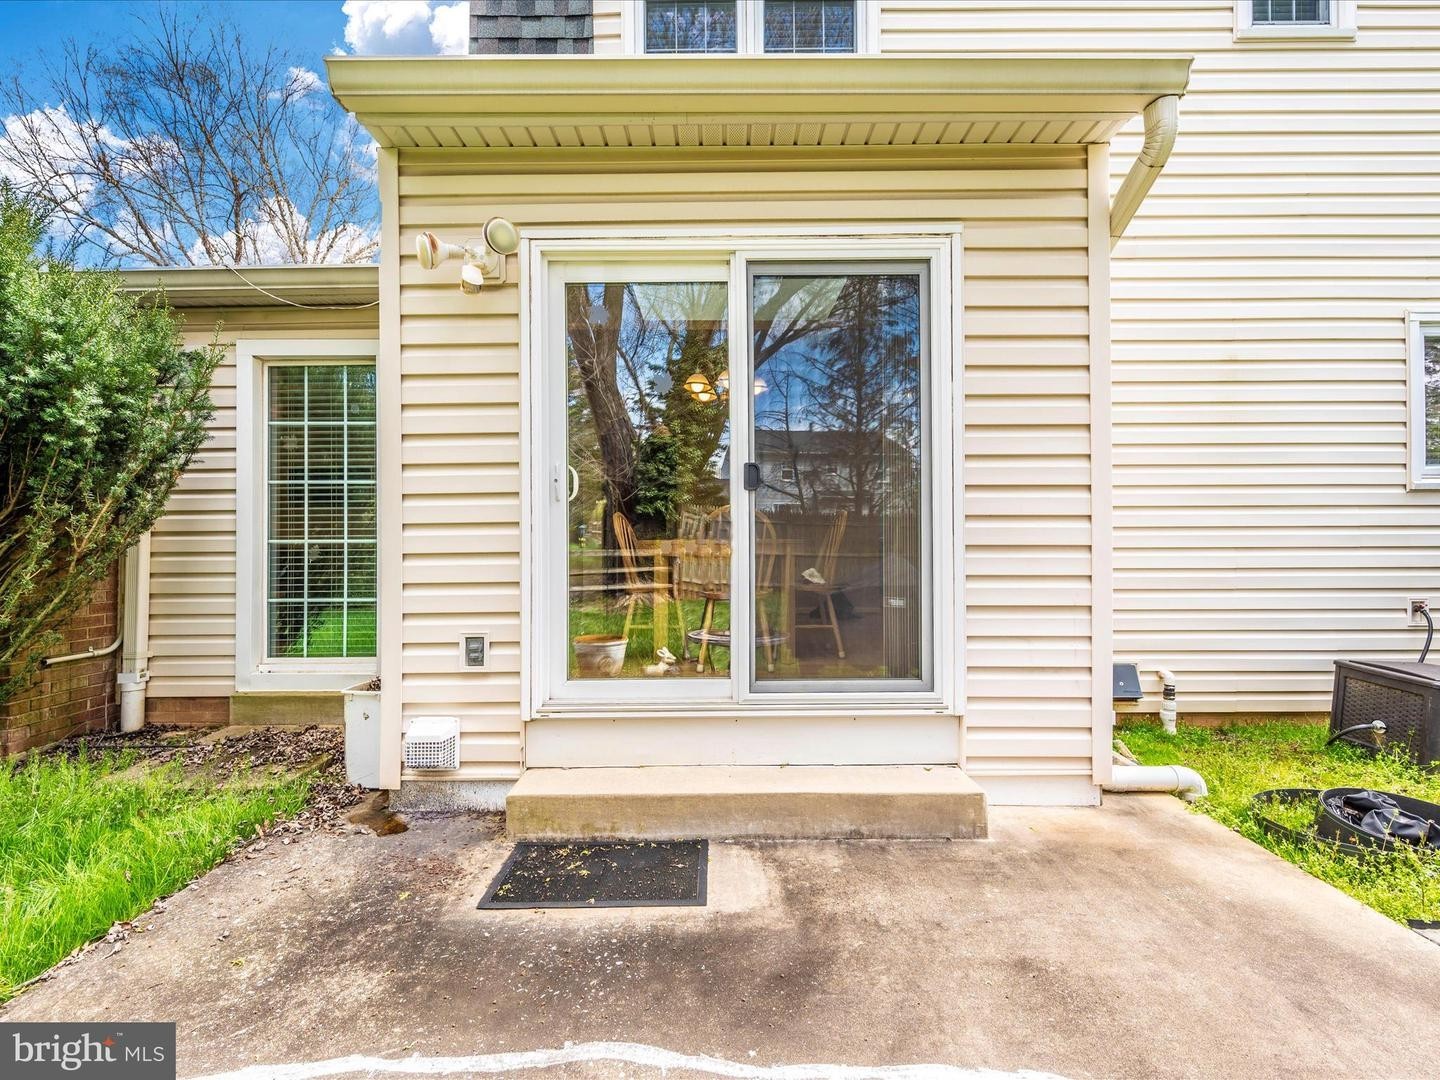 48. 9 Quelway Ct